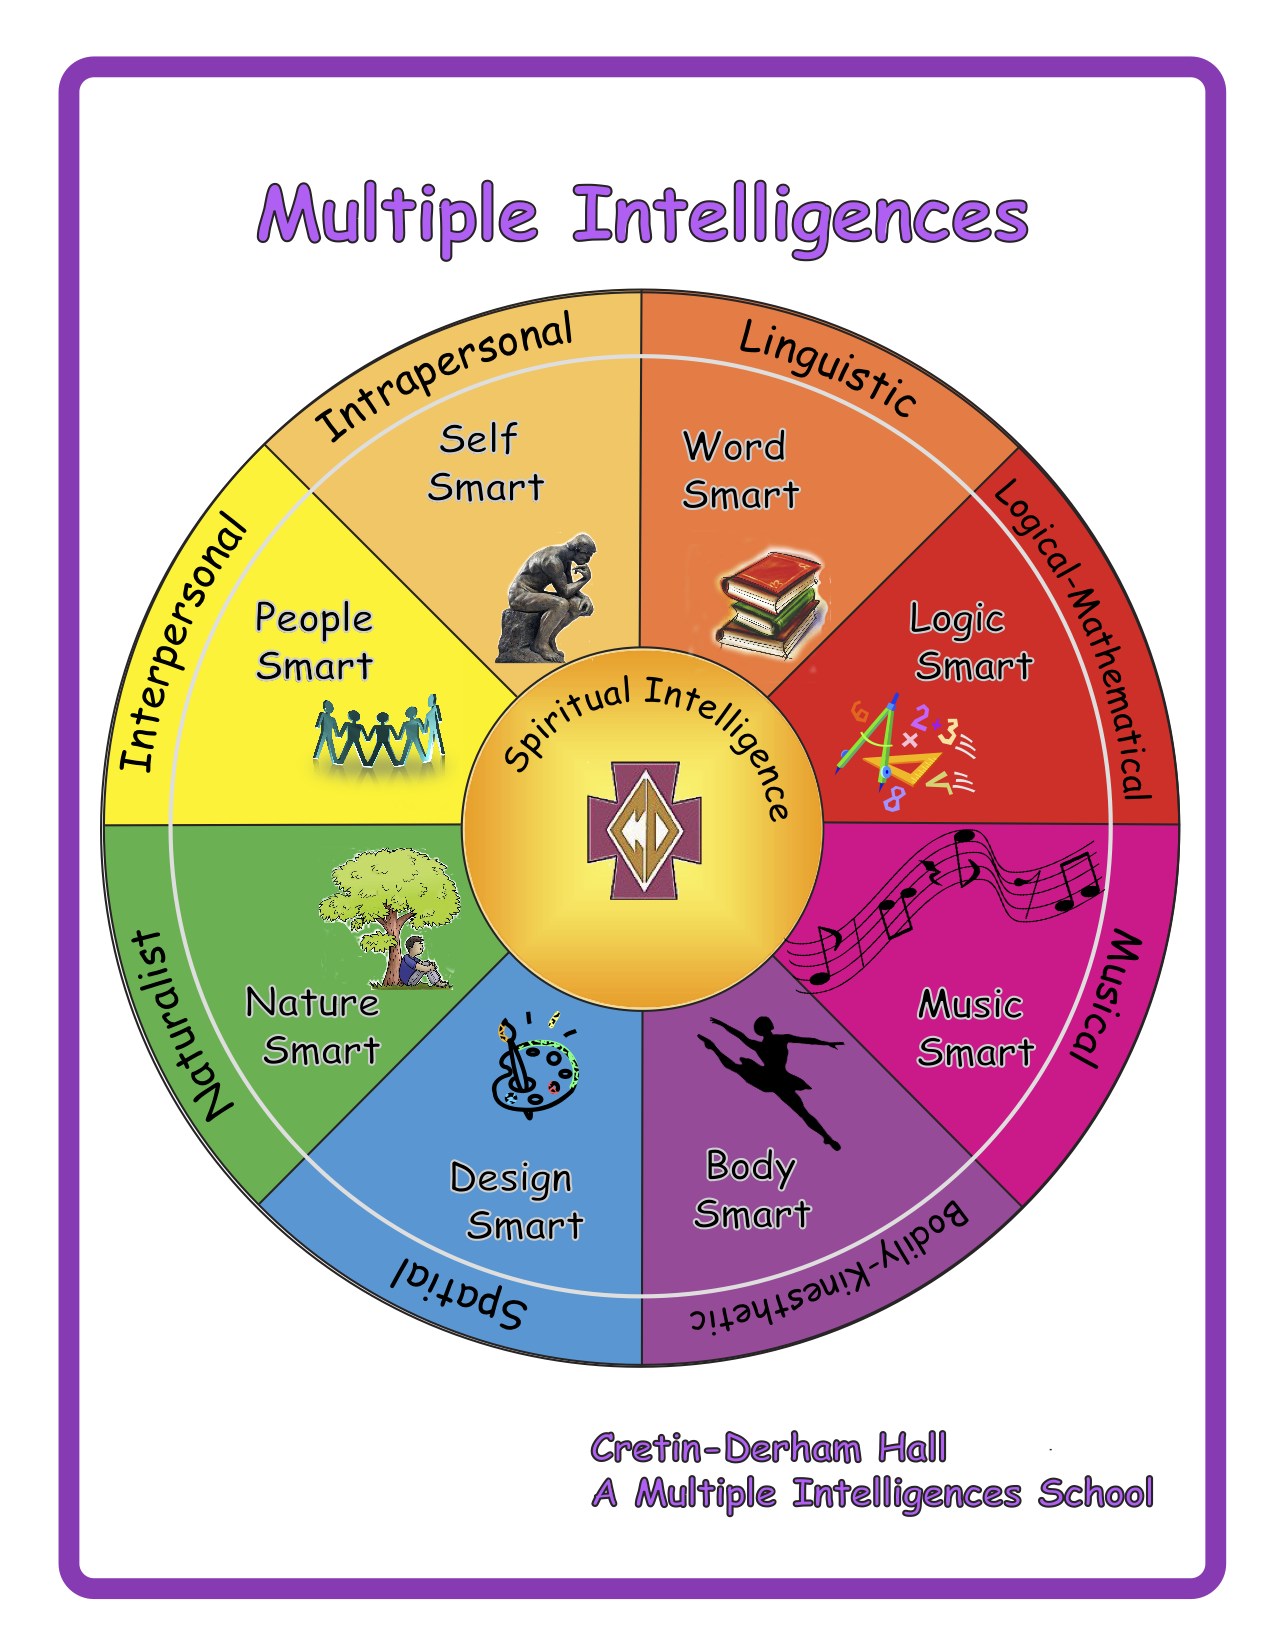 CDH is committed to providing an education focusing on the individual learning styles and multiple intelligences of each member of the community. We recognize that MILS provides the CDH community better opportunities to prepare 21st Century learners with the needed skills and knowledge. 